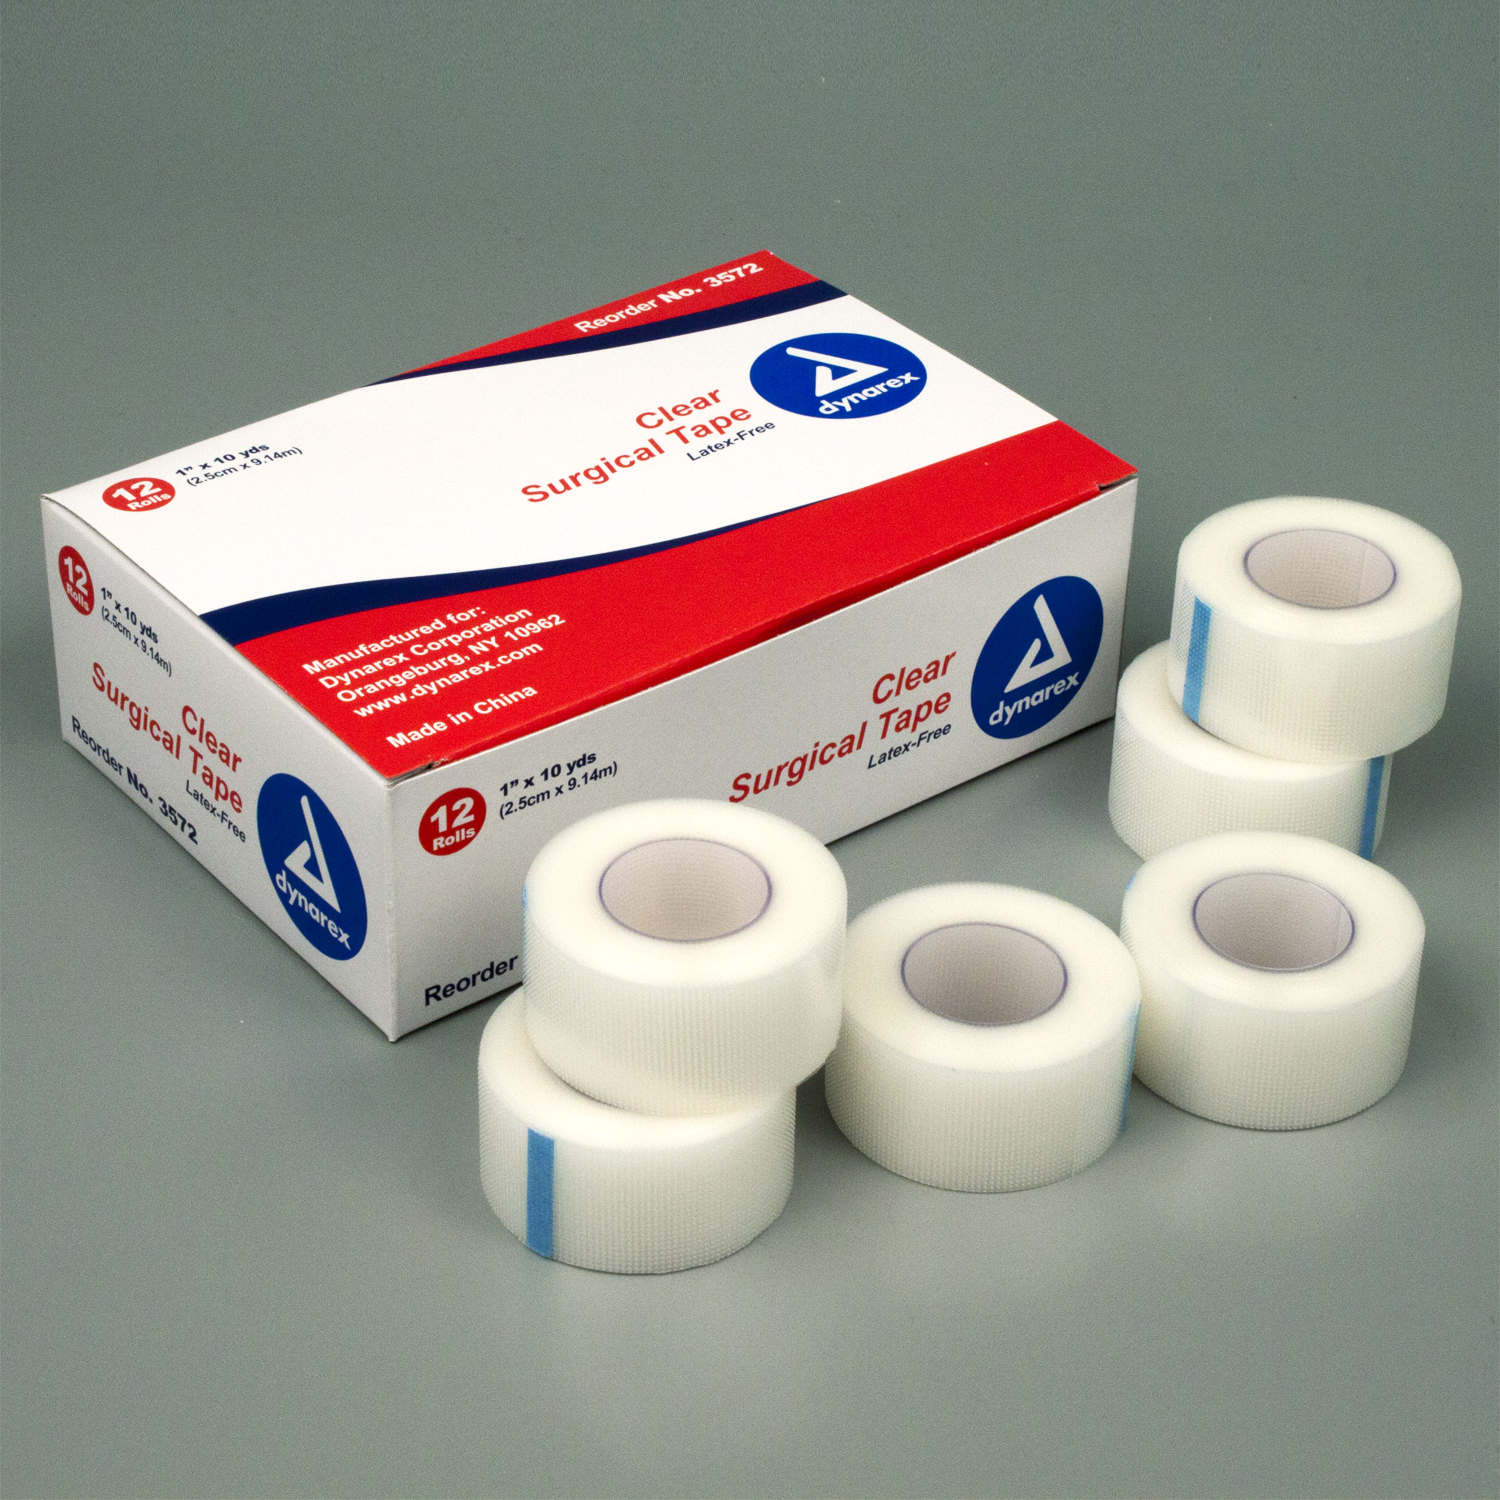 1 Inch Clear Surgical Tape: Box of 12